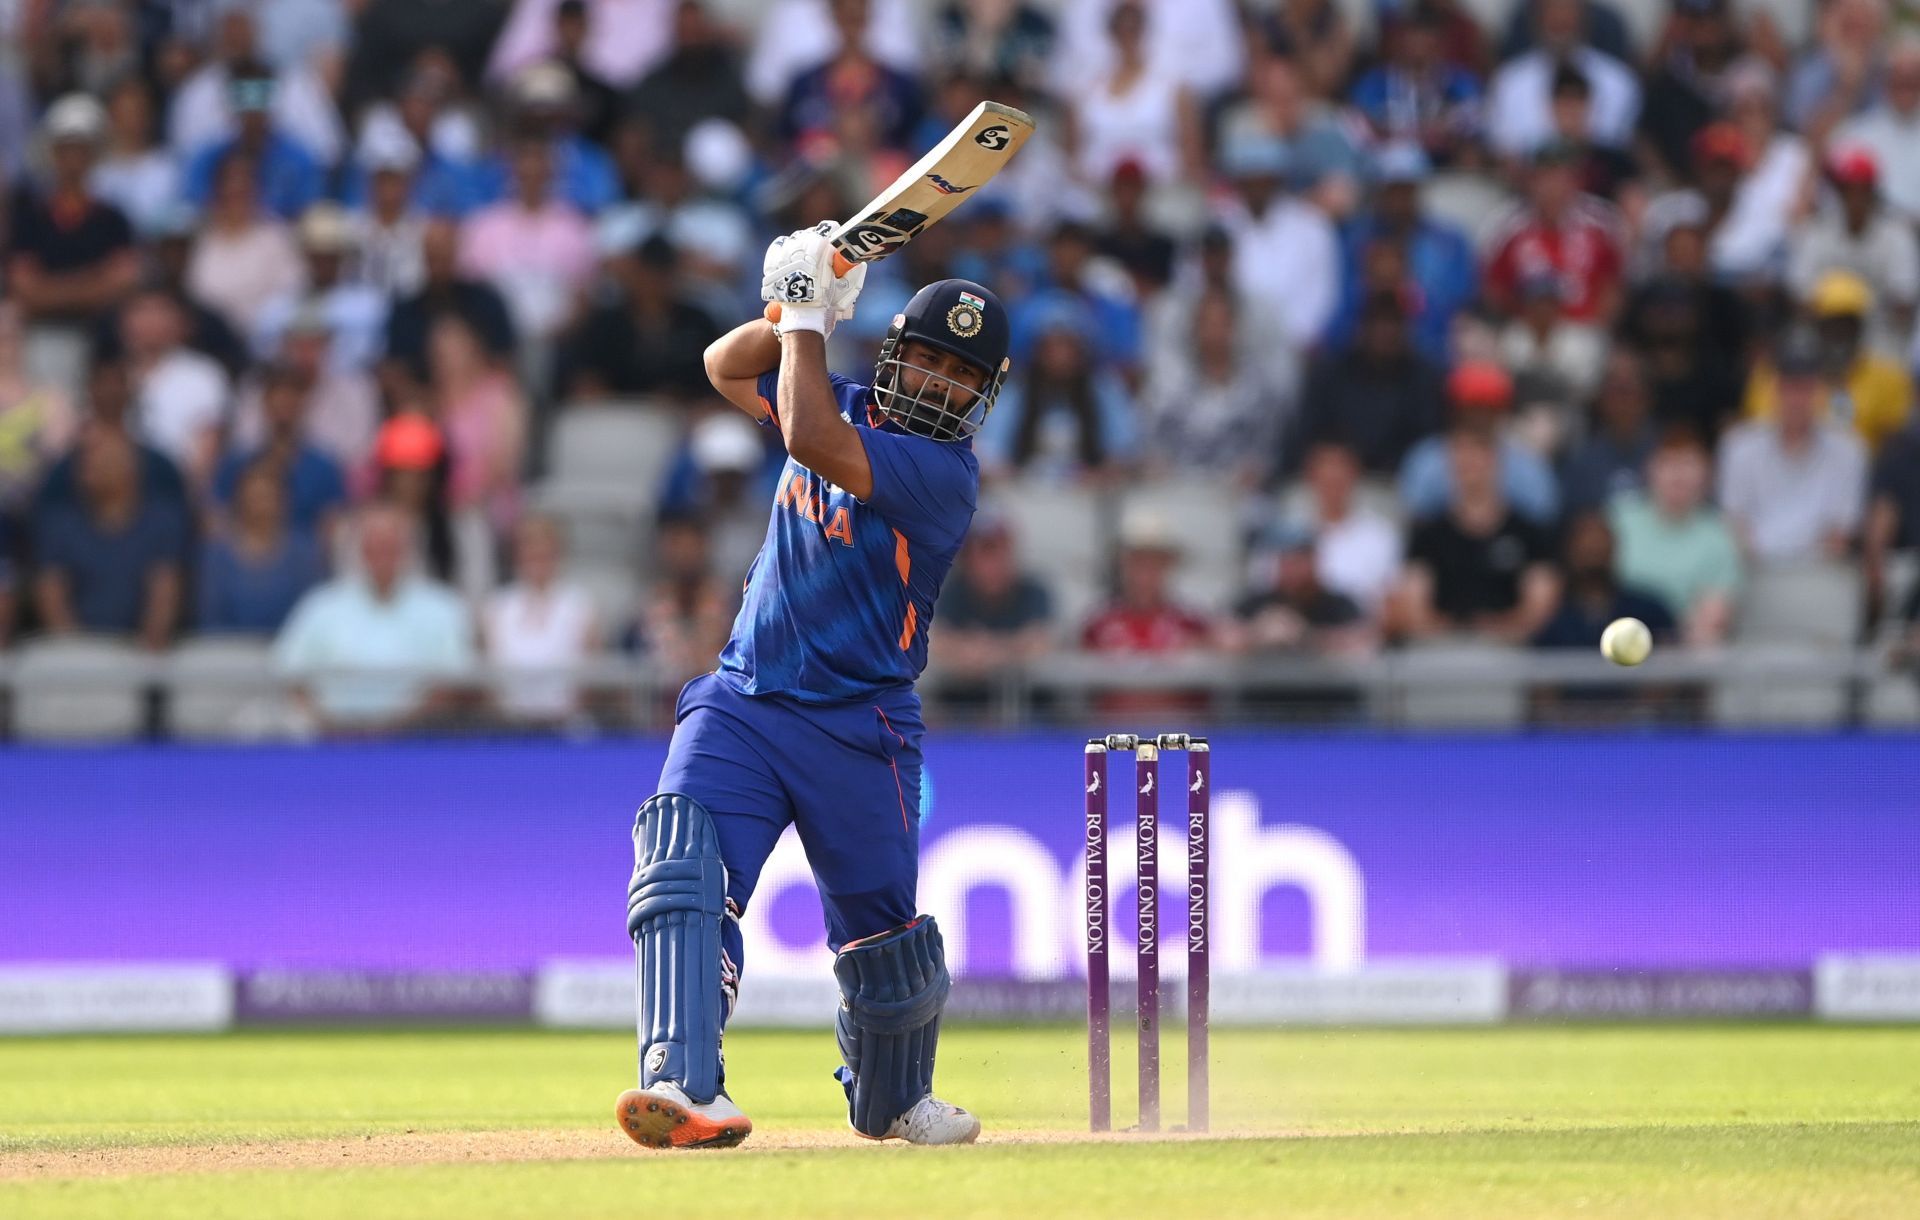 Rishabh Pant batted at the top of the order in the T20I series against England